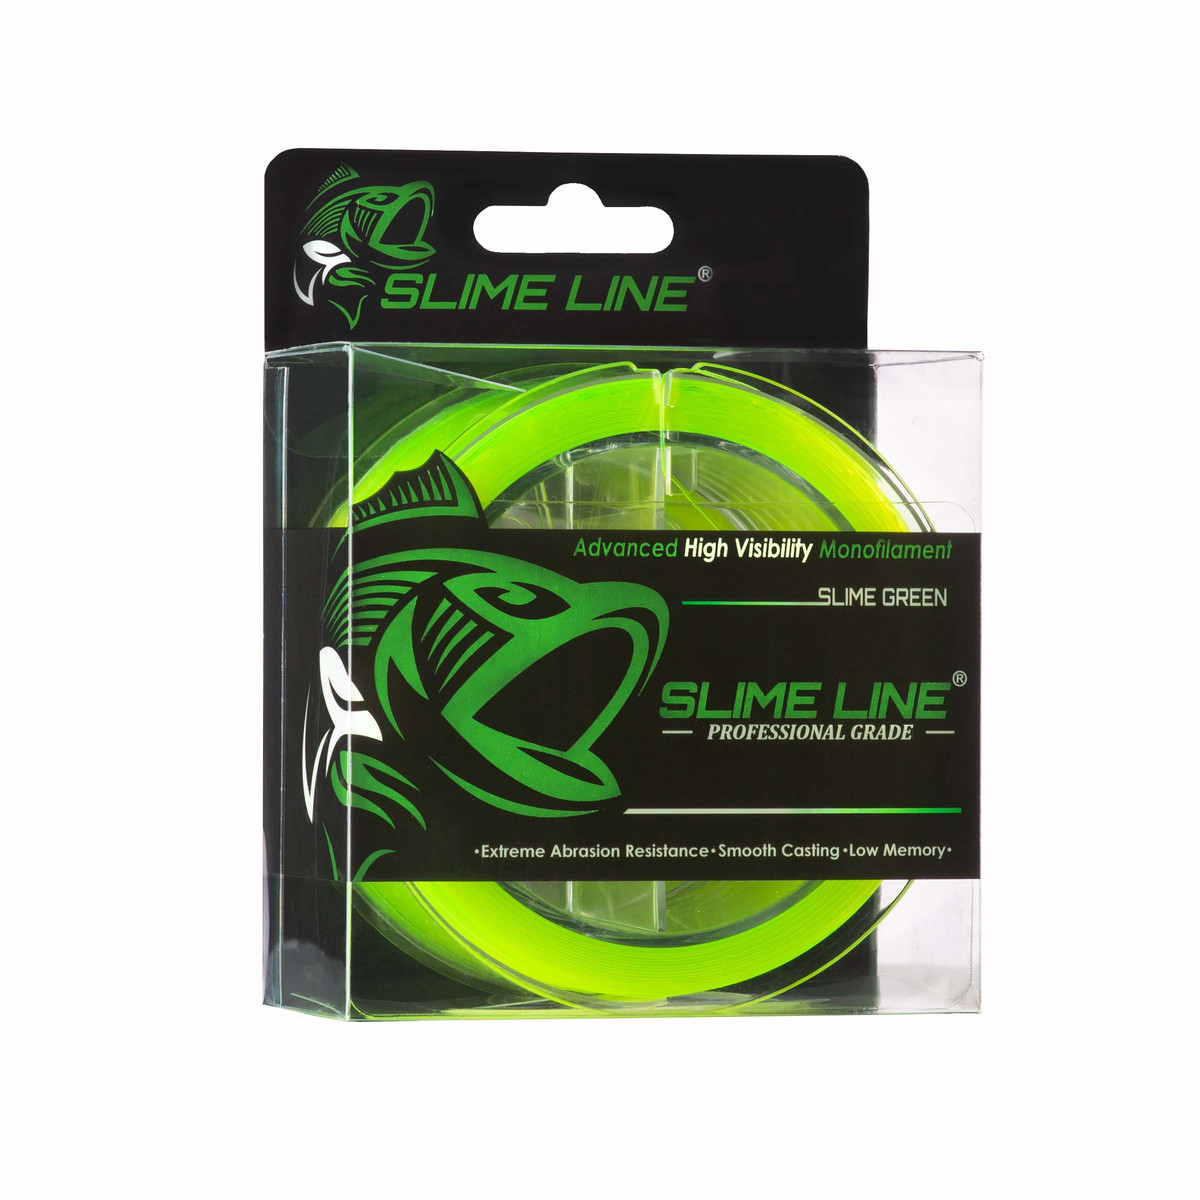 *NEW* Catch The Fever SLIME LINE 20# 1500 yd Mono Fishing Line GREEN 1/2lb SPOOL 